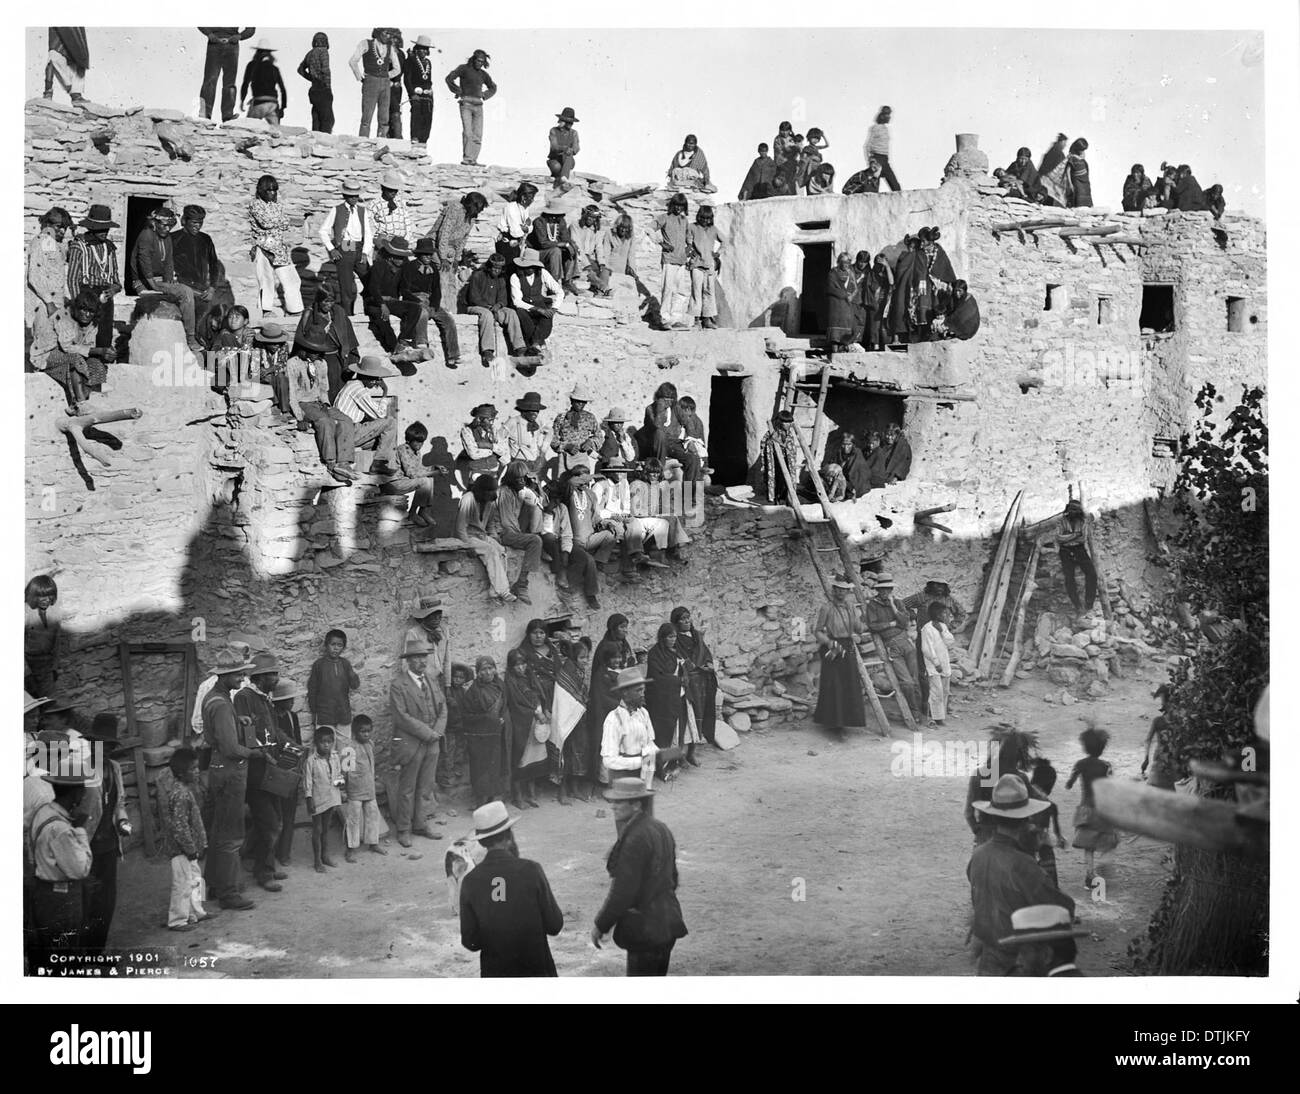 Over one hundred visitors line up on the roofs of the adobe dwellings of the Hopi Indian village of Mishongnovi awaiting the Snake Dance, ca.1901 Stock Photo